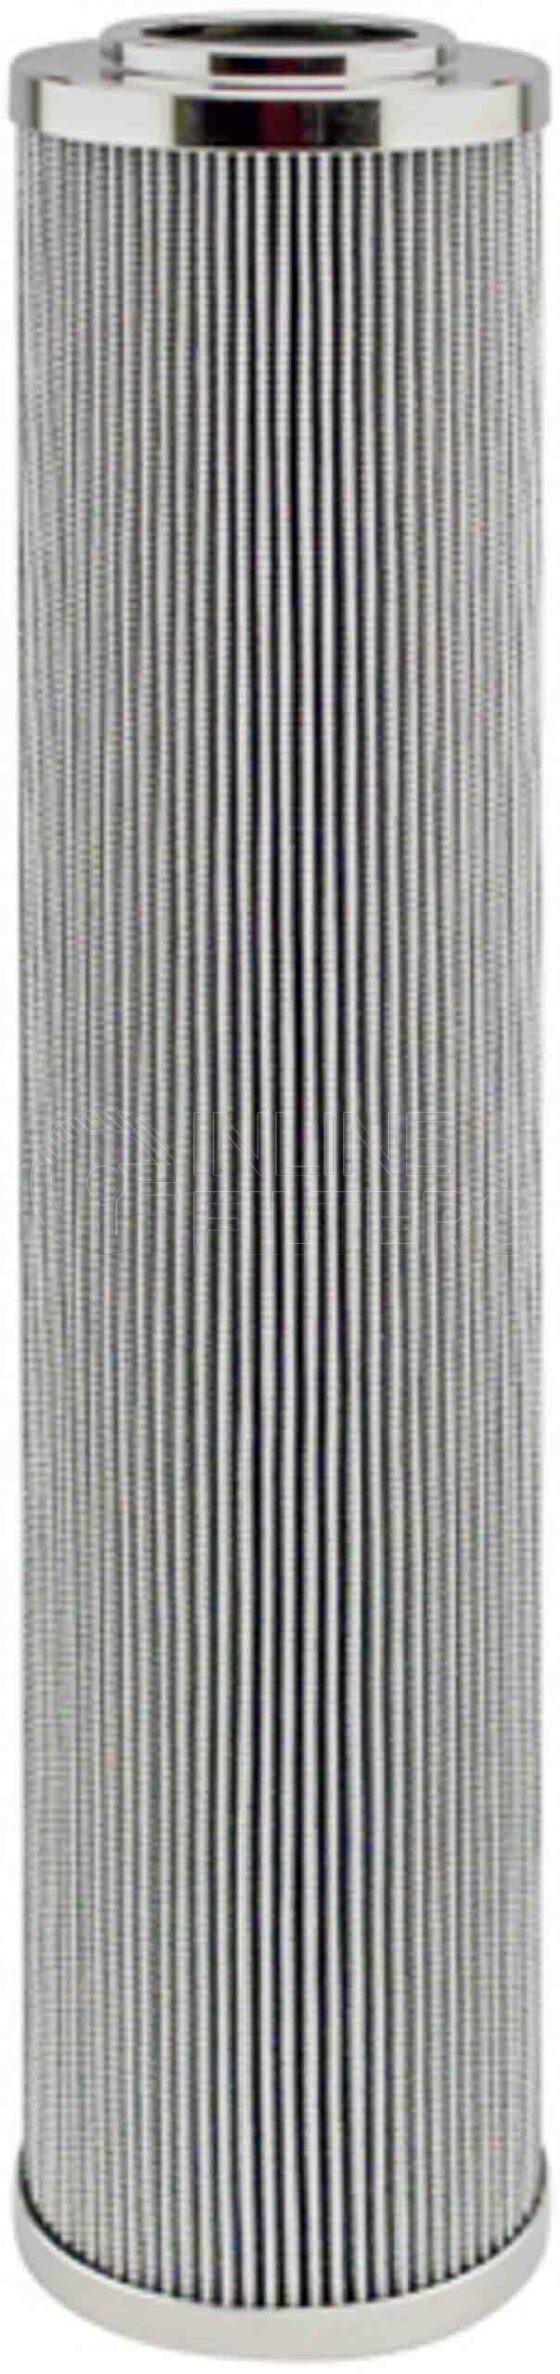 Baldwin PT23053-MPG. Baldwin – Hydraulic Filter Elements – PT23053-MPG OBSOLETE OBSOLETE. Availability Limited to Dealer Stock. Compatible Competitor Part Number Eppensteiner 2460H10SLC00P Application Eppensteiner Hydraulic Assemblies Outside Diameter 3 1/8 (79.4) Length 15 (381.0) Product Type Maximum Performance Glass Hydraulic Element Inside Diameter 1 1/2 (38.1) Brand Baldwin Division Engine Mobile Aftermarket Industry Marine Mining Oil and […]